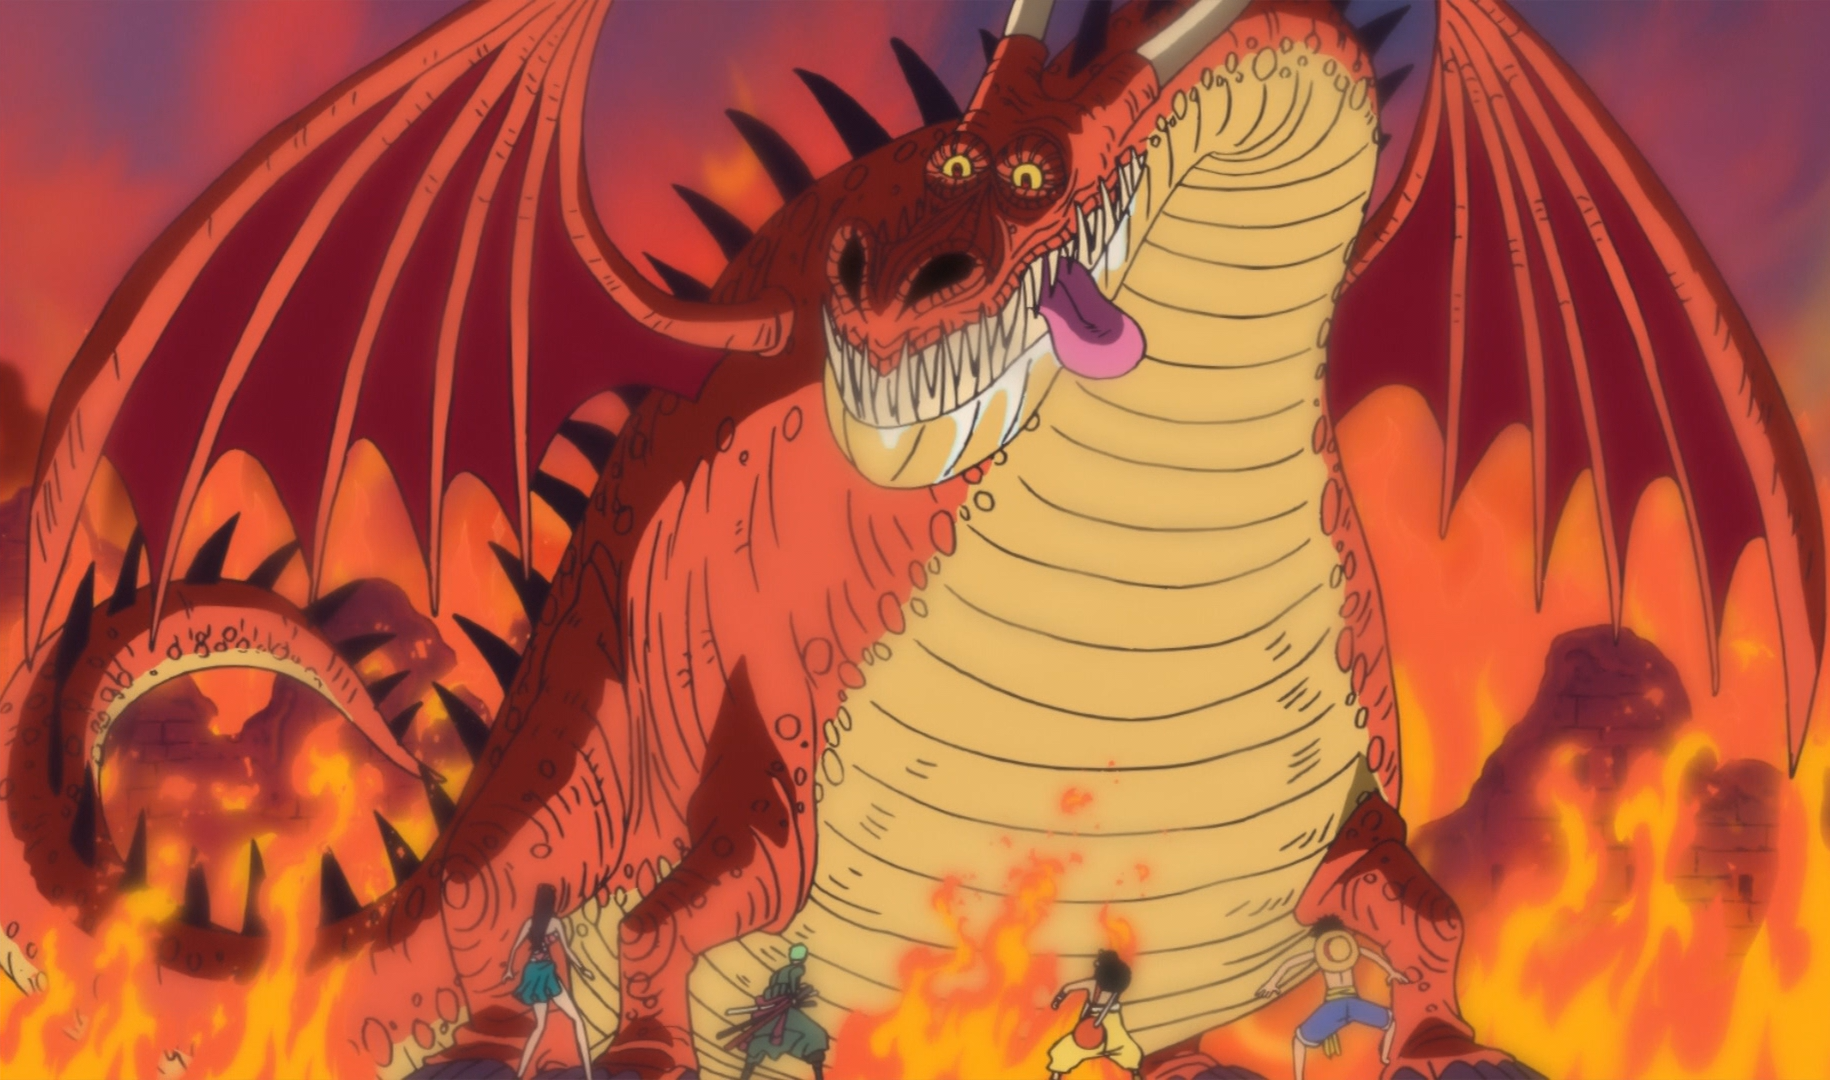 Monkey D. Dragon's Powers and Role in One Piece: Revealed! — Eightify